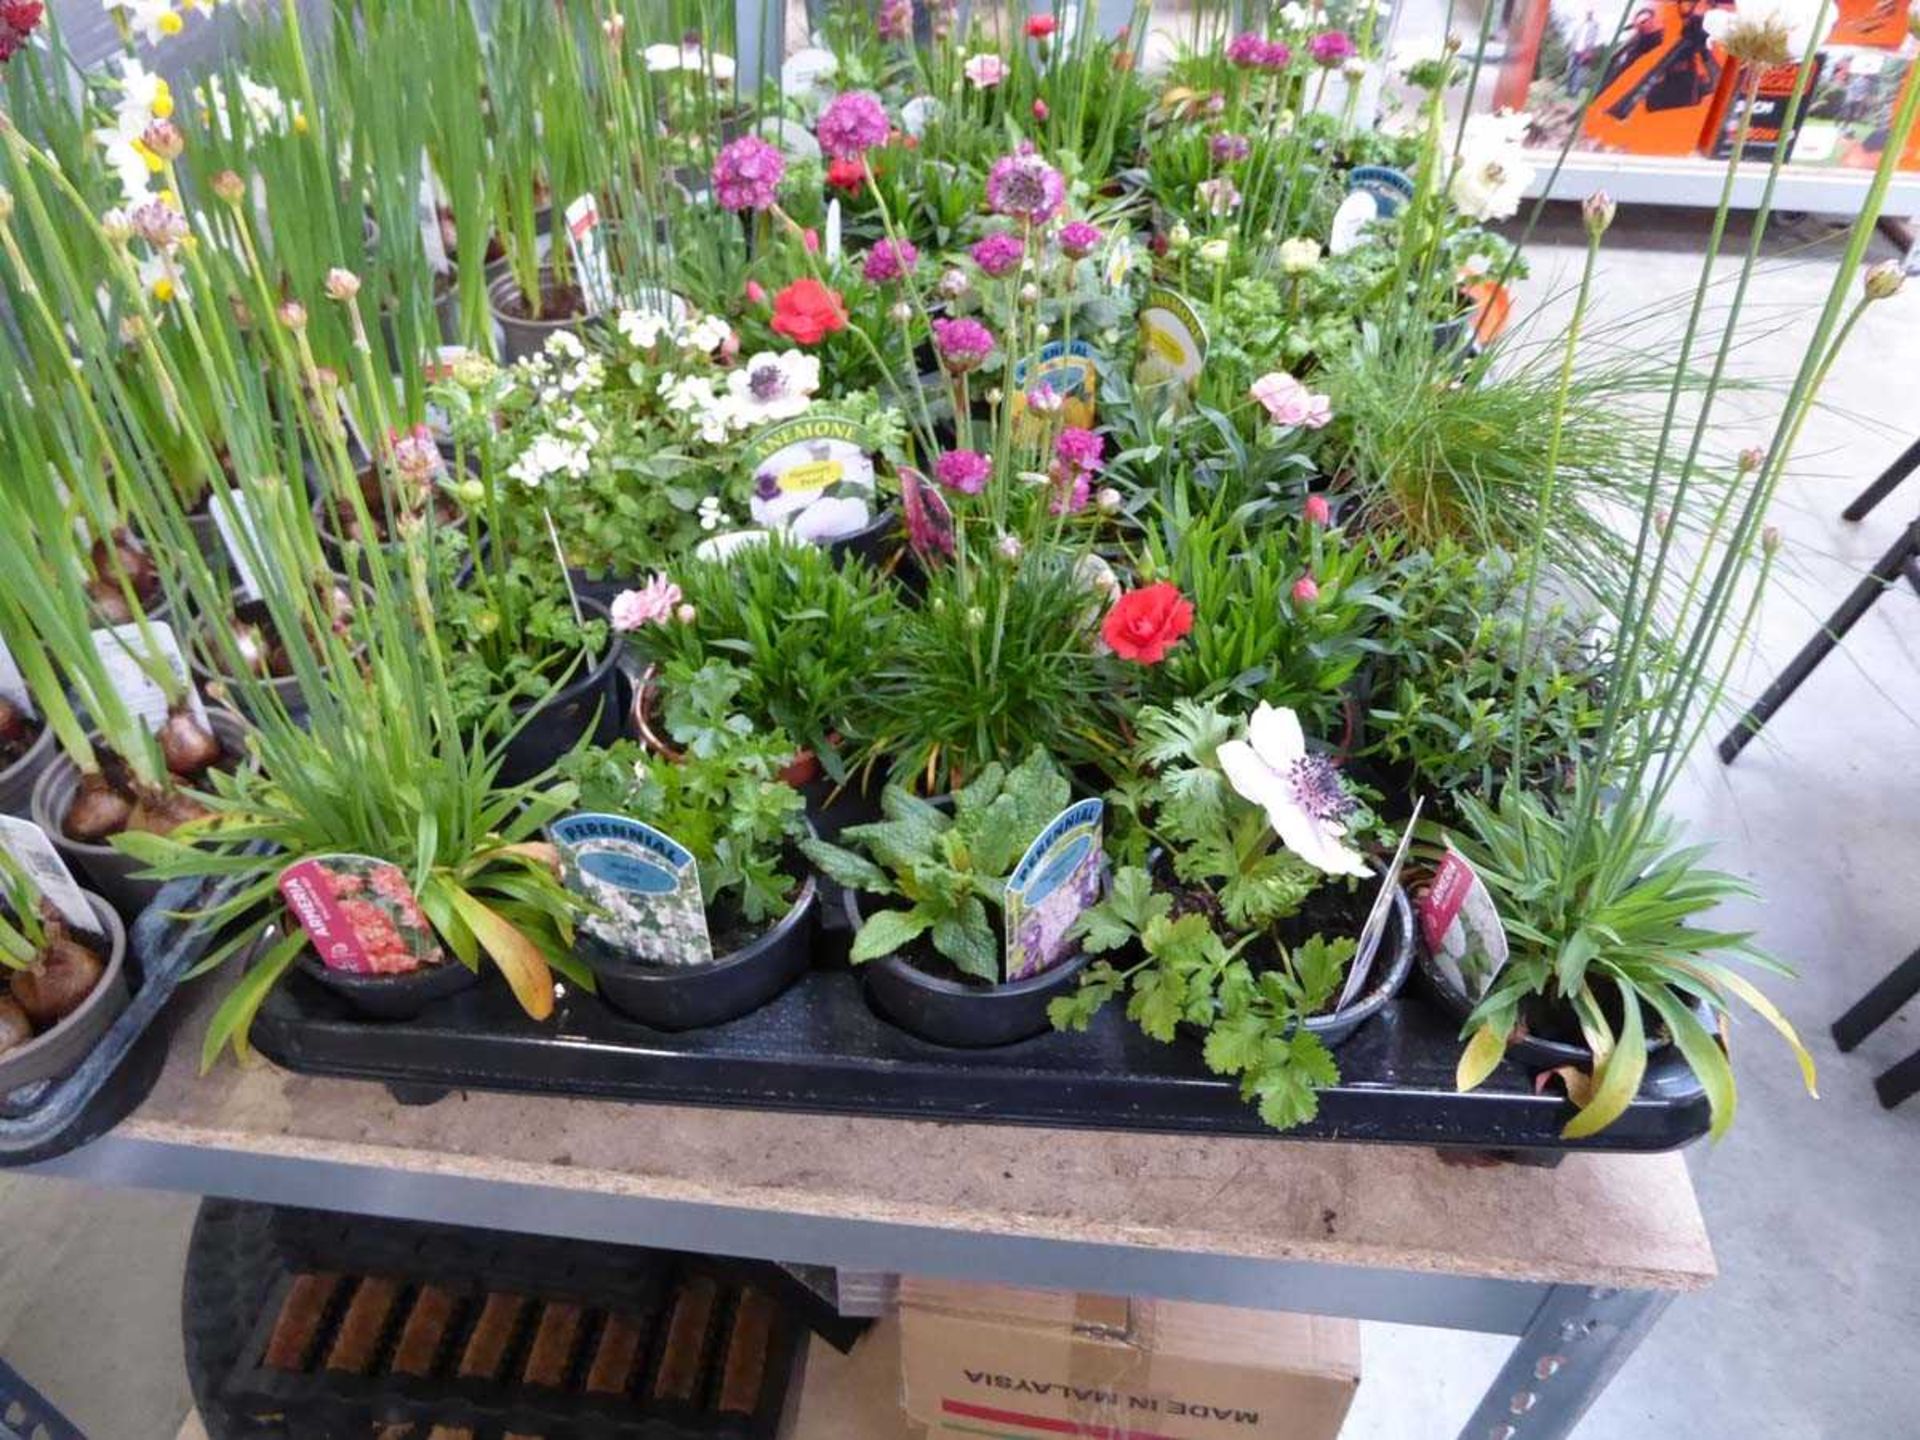 Tray containing 10 pots of mixed perennial plants